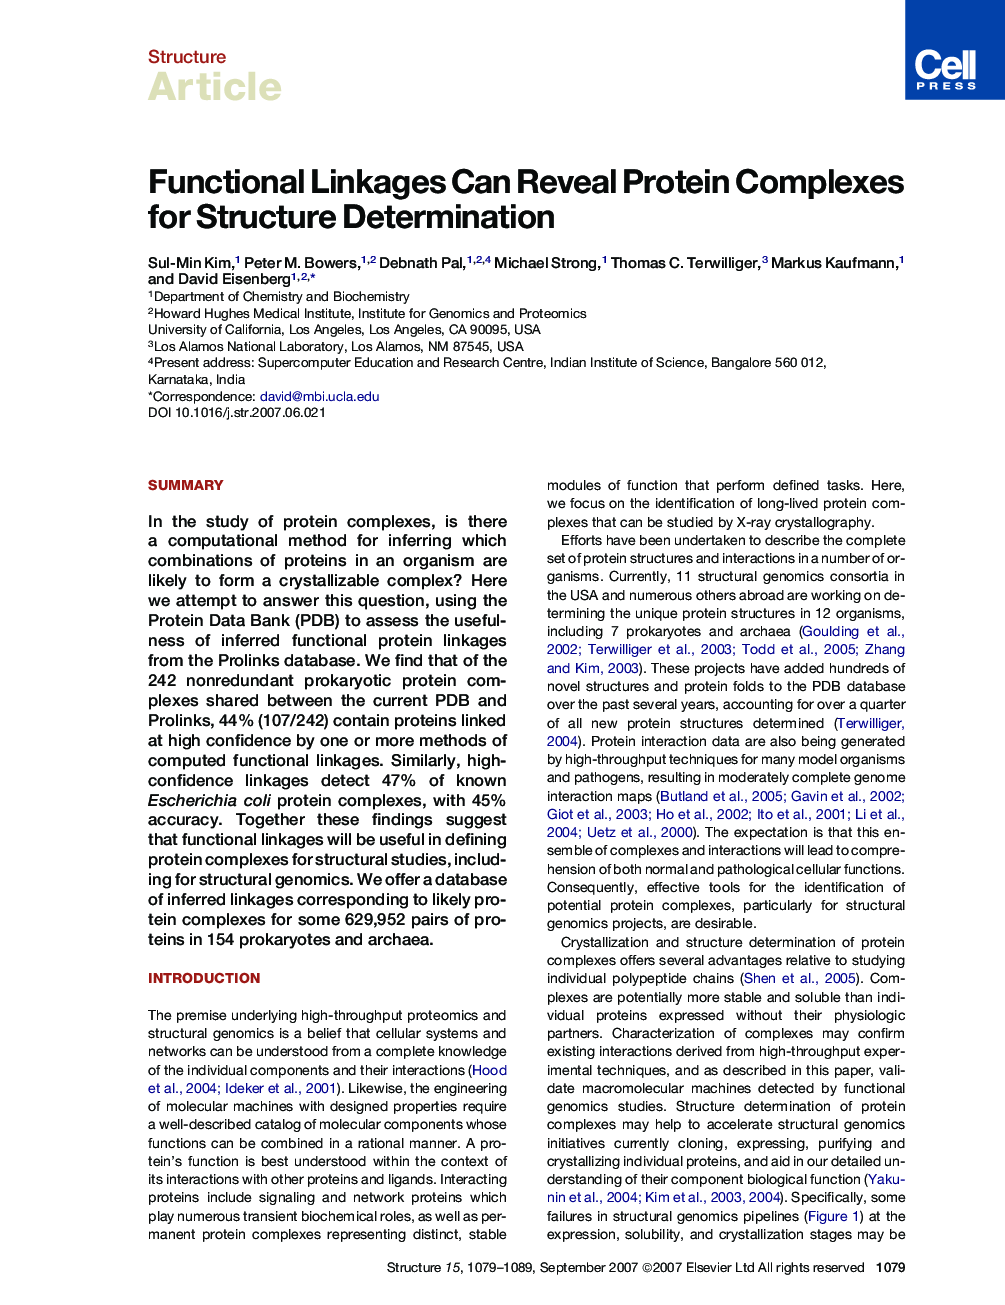 Functional Linkages Can Reveal Protein Complexes for Structure Determination